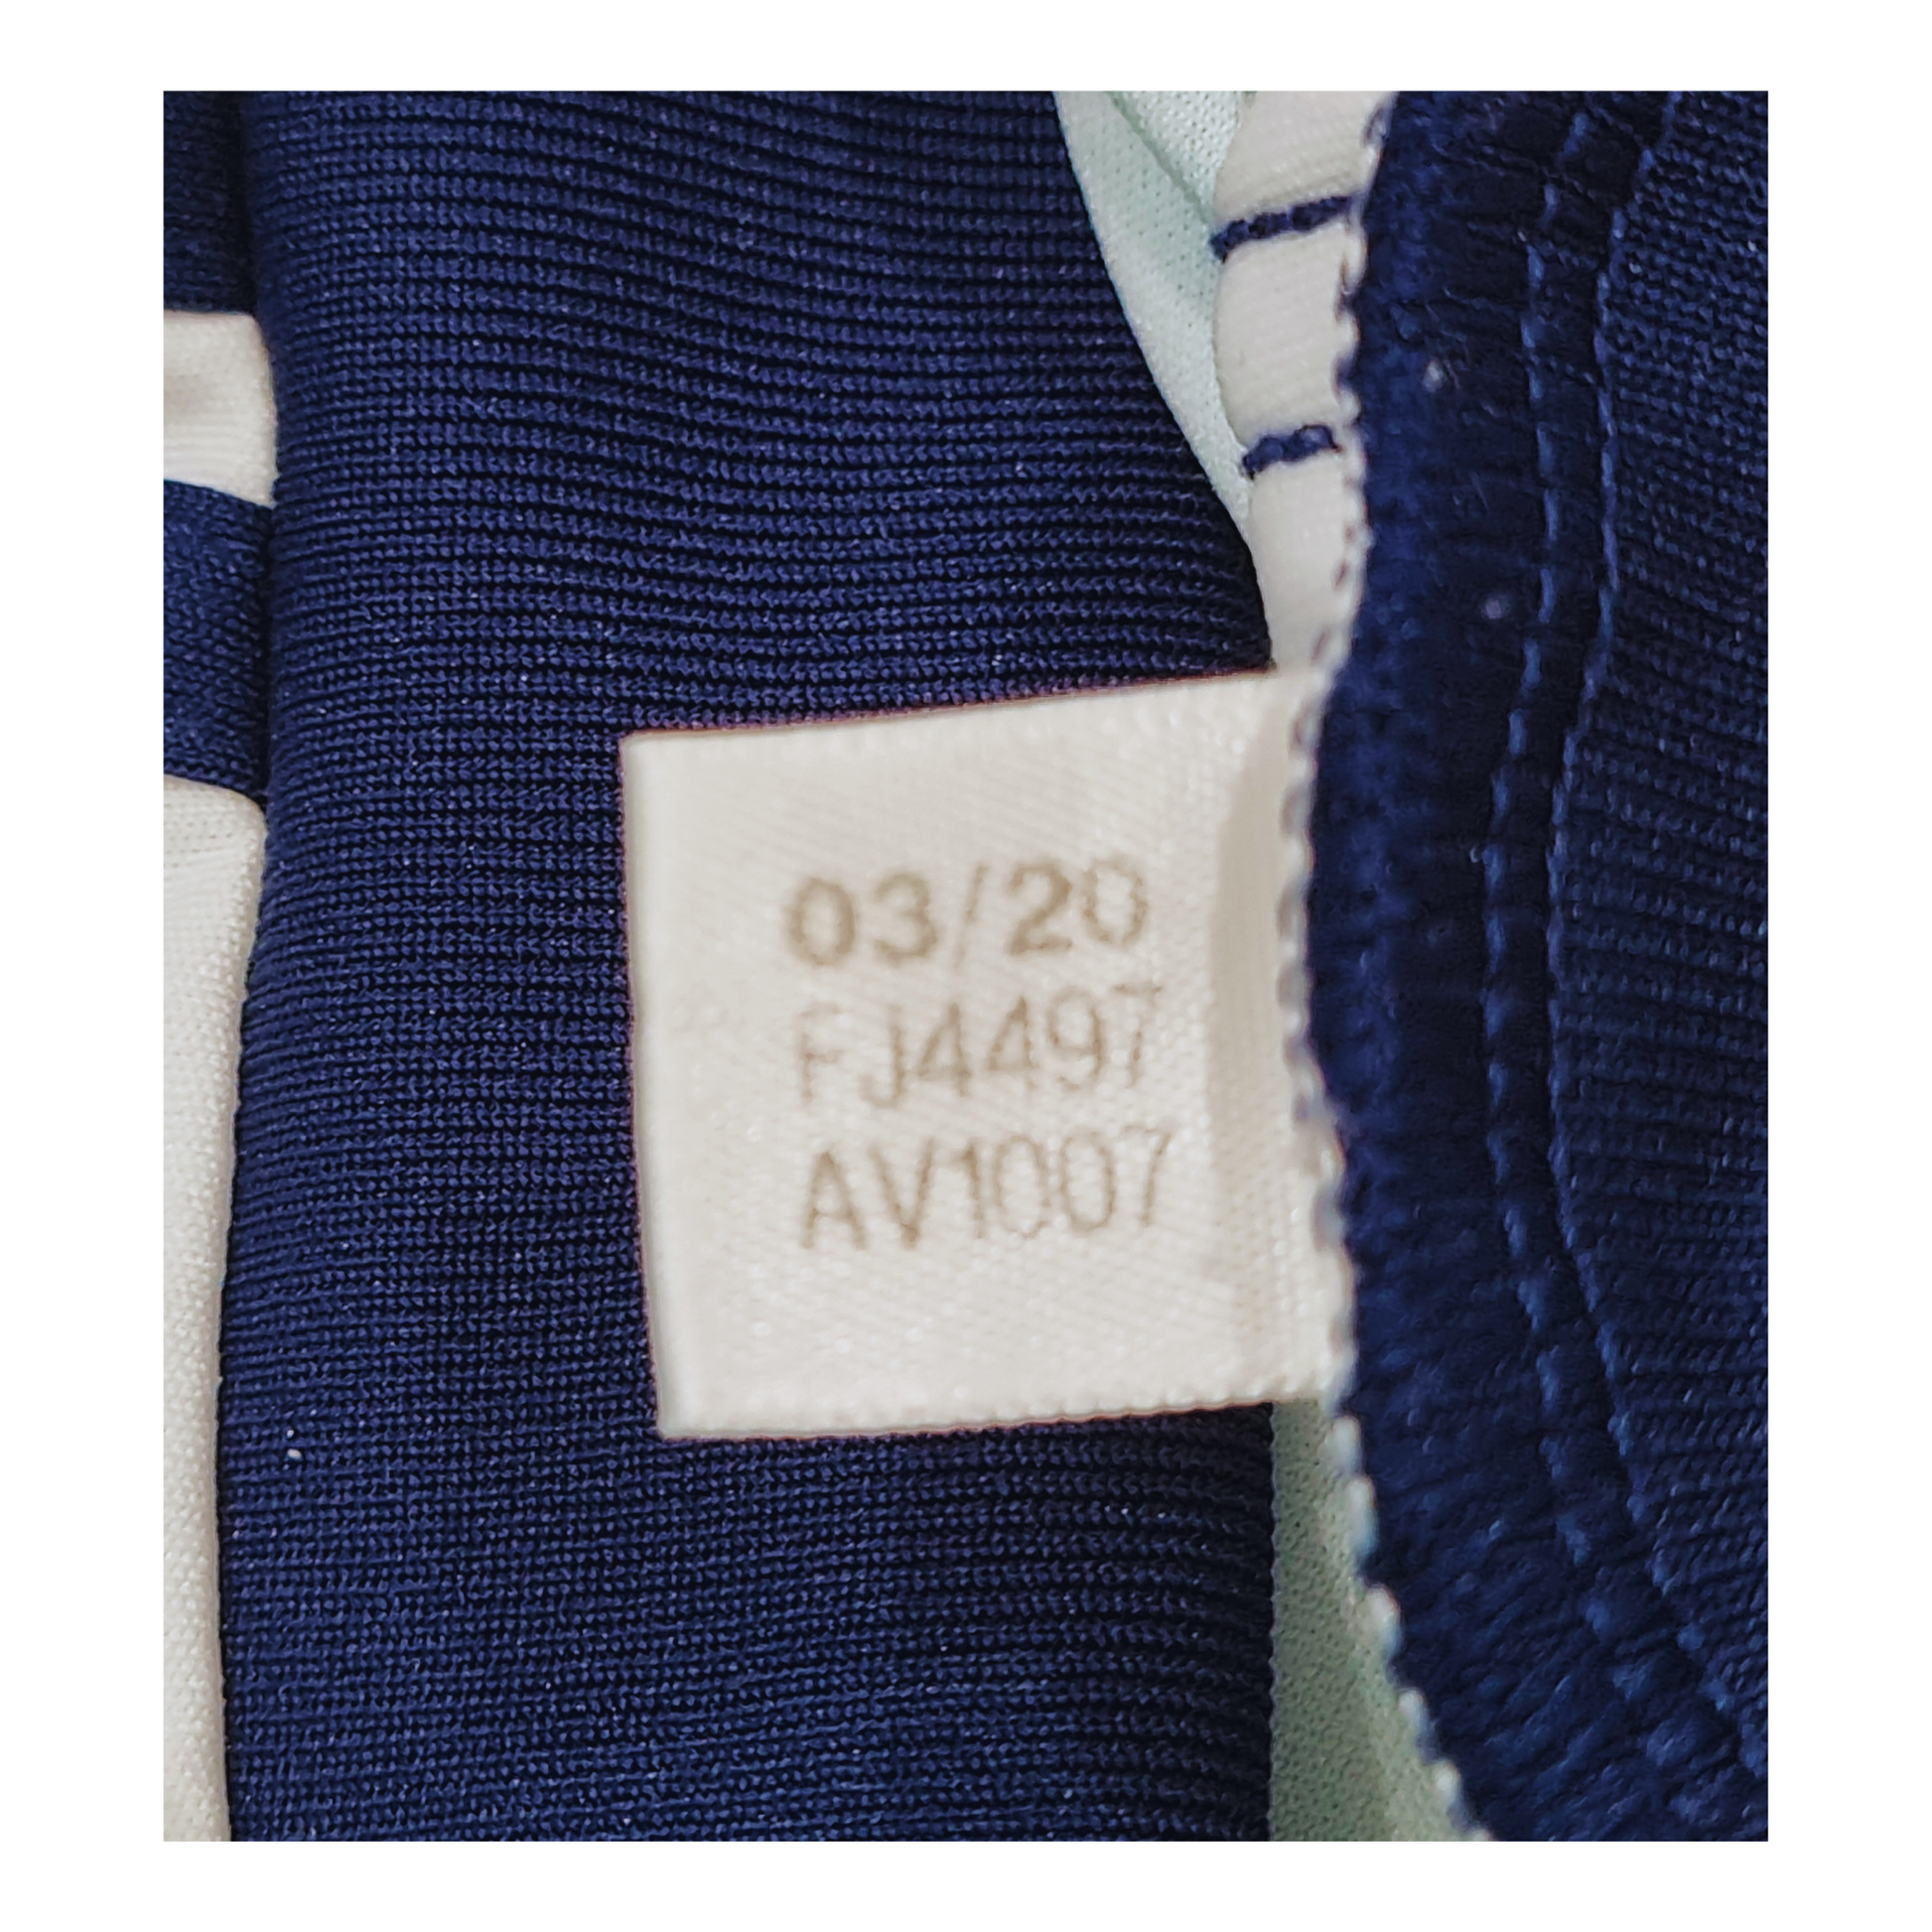 A close up of a blue and white label on an Adidas Wolverhampton Wanderers 2020/21 Away Jersey.